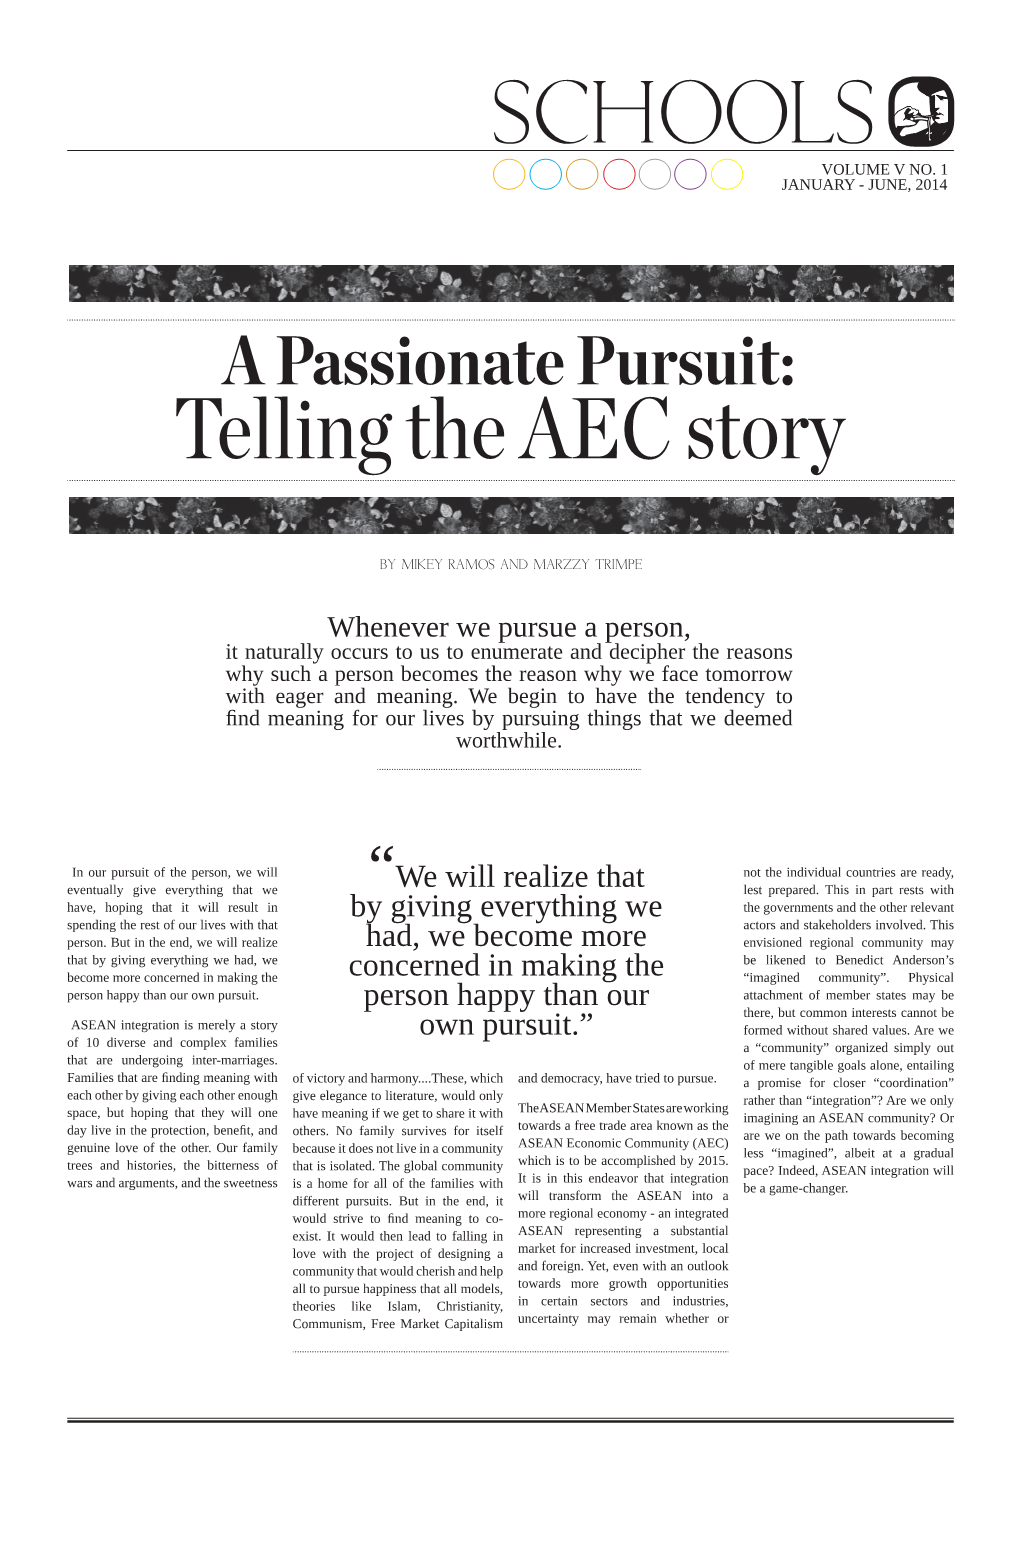 A Passionate Pursuit: Telling the AEC Story